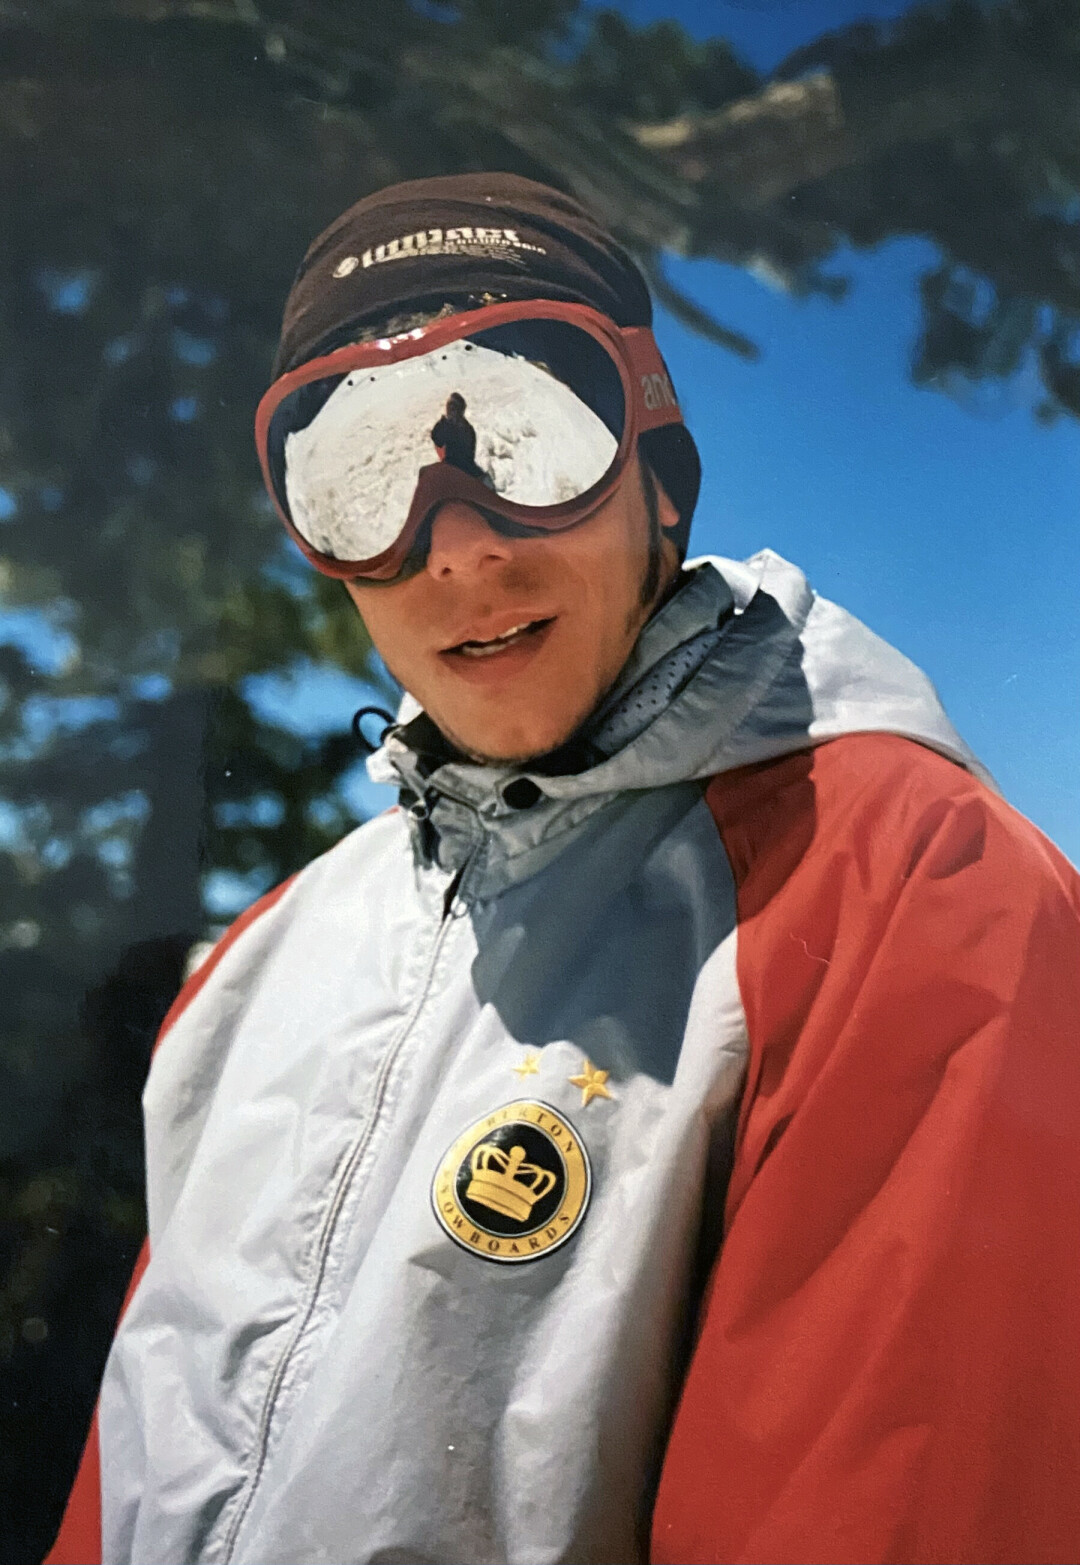 Skip garnered dozens of sponsorships over his career, including Burton Snowboards and Miller Brewing Co. Submitted photo.